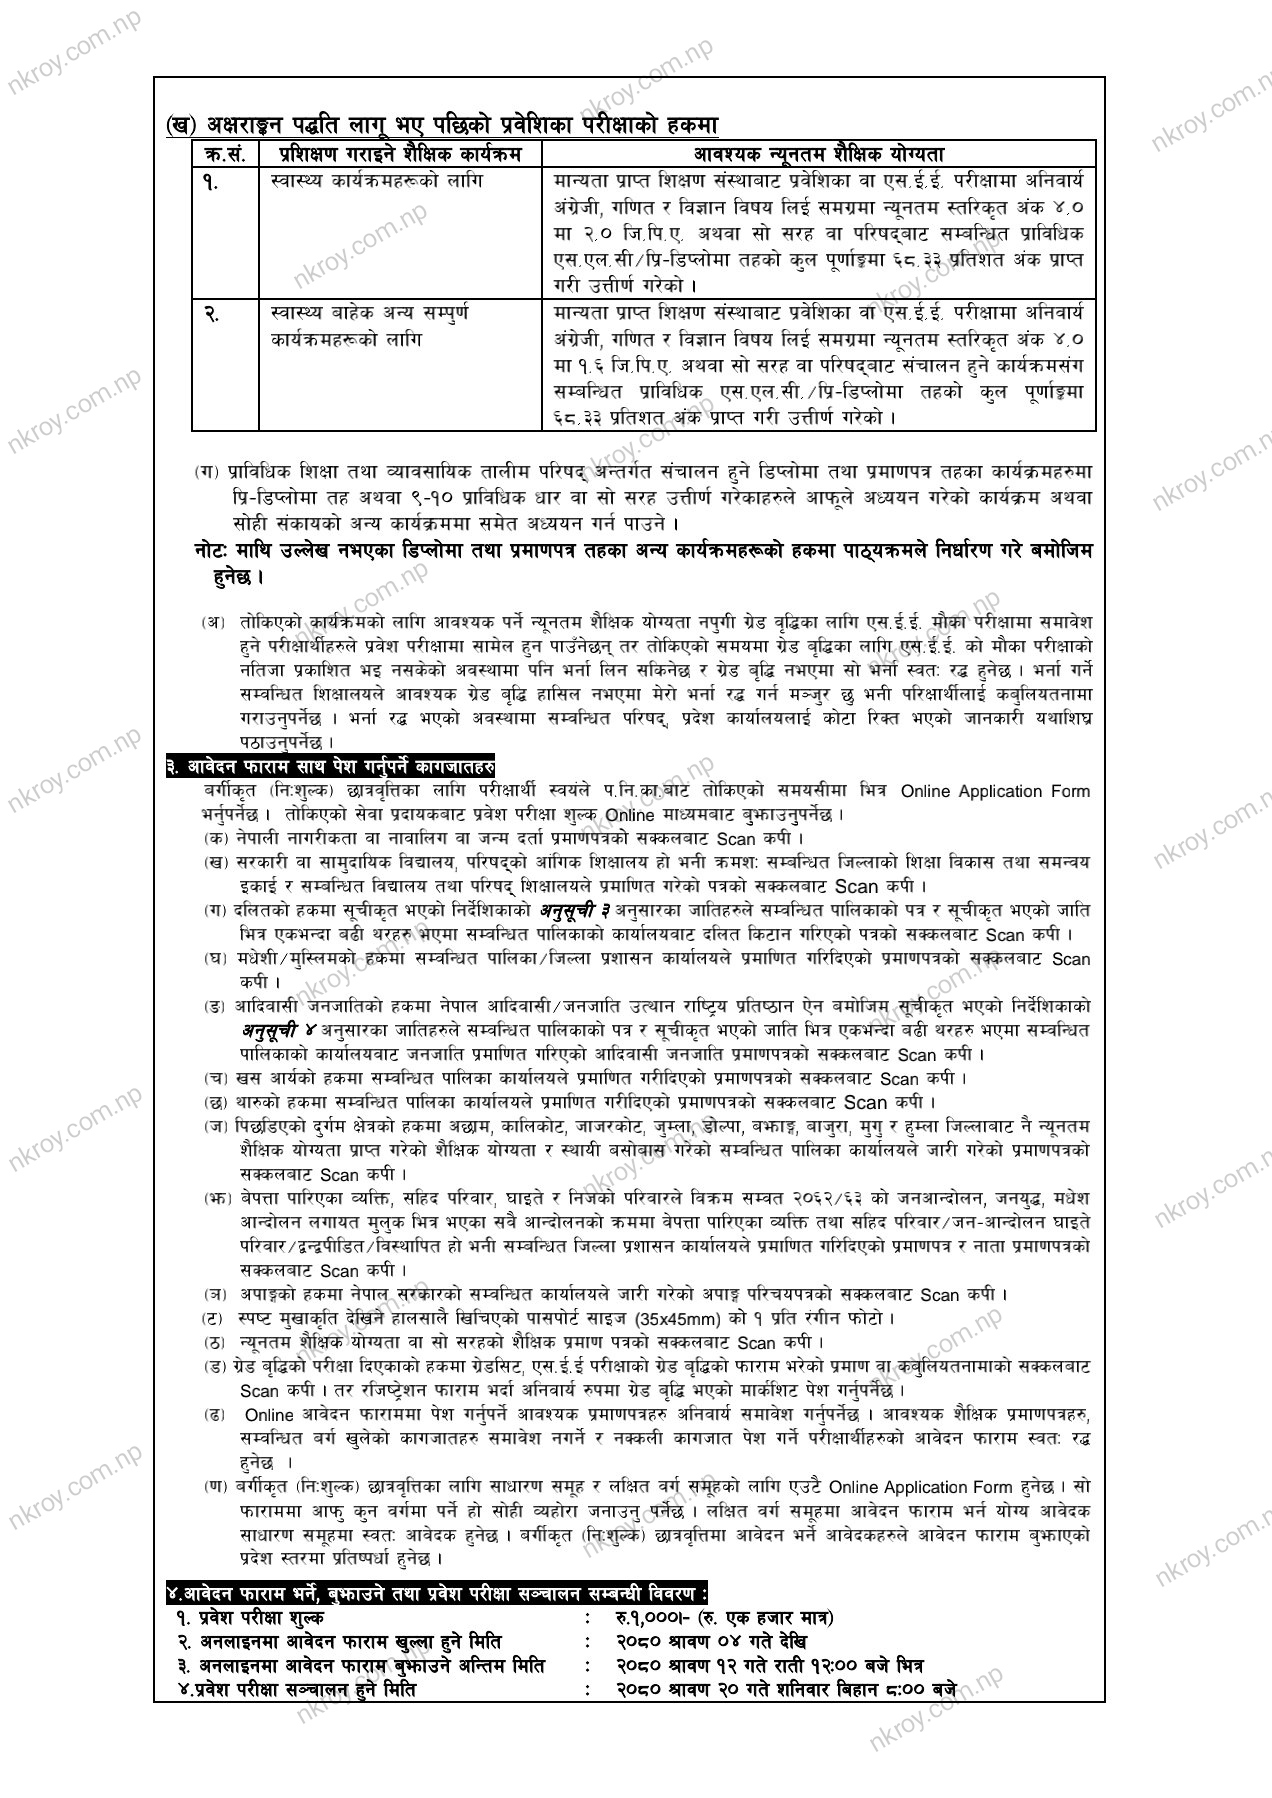 CTEVT Diploma/PCL Level Classified Scholarship Entrance Exam Notice 20